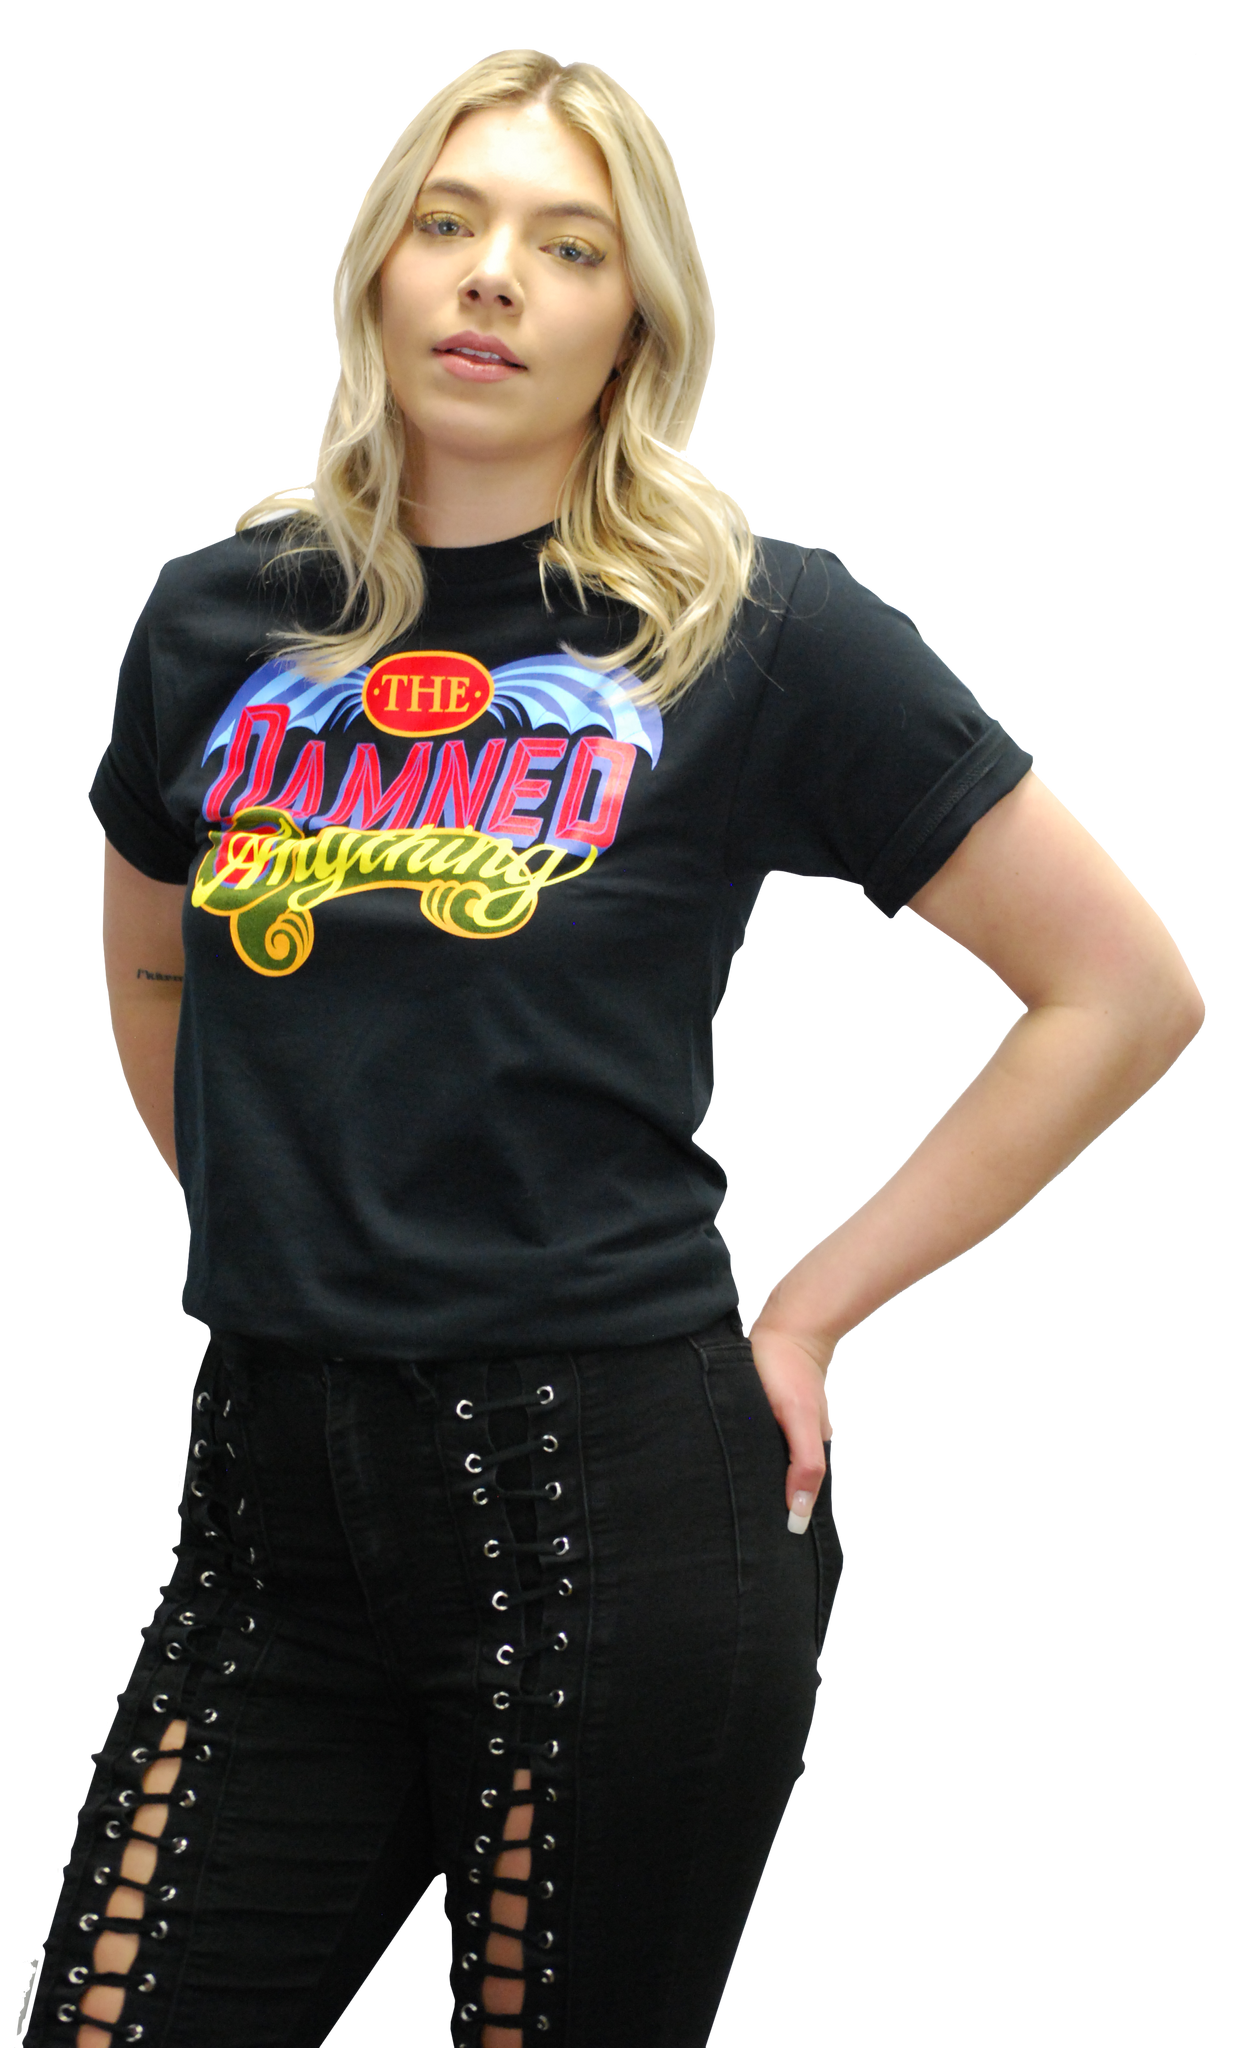 DAMNED: "ANYTHING"  T-SHIRT